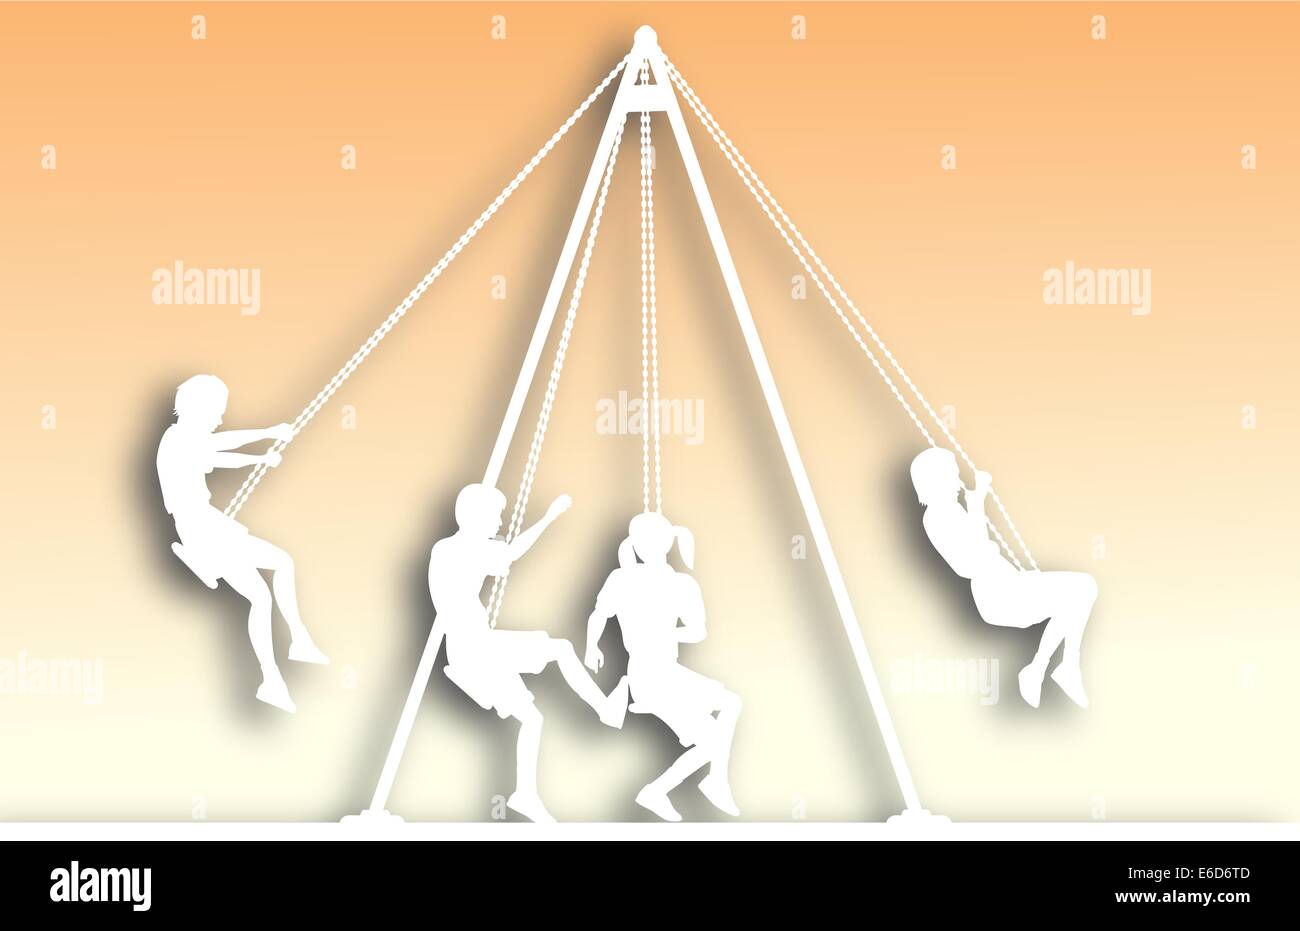 Editable vector cutout of children on playground swings with background made using a gradient mesh Stock Vector